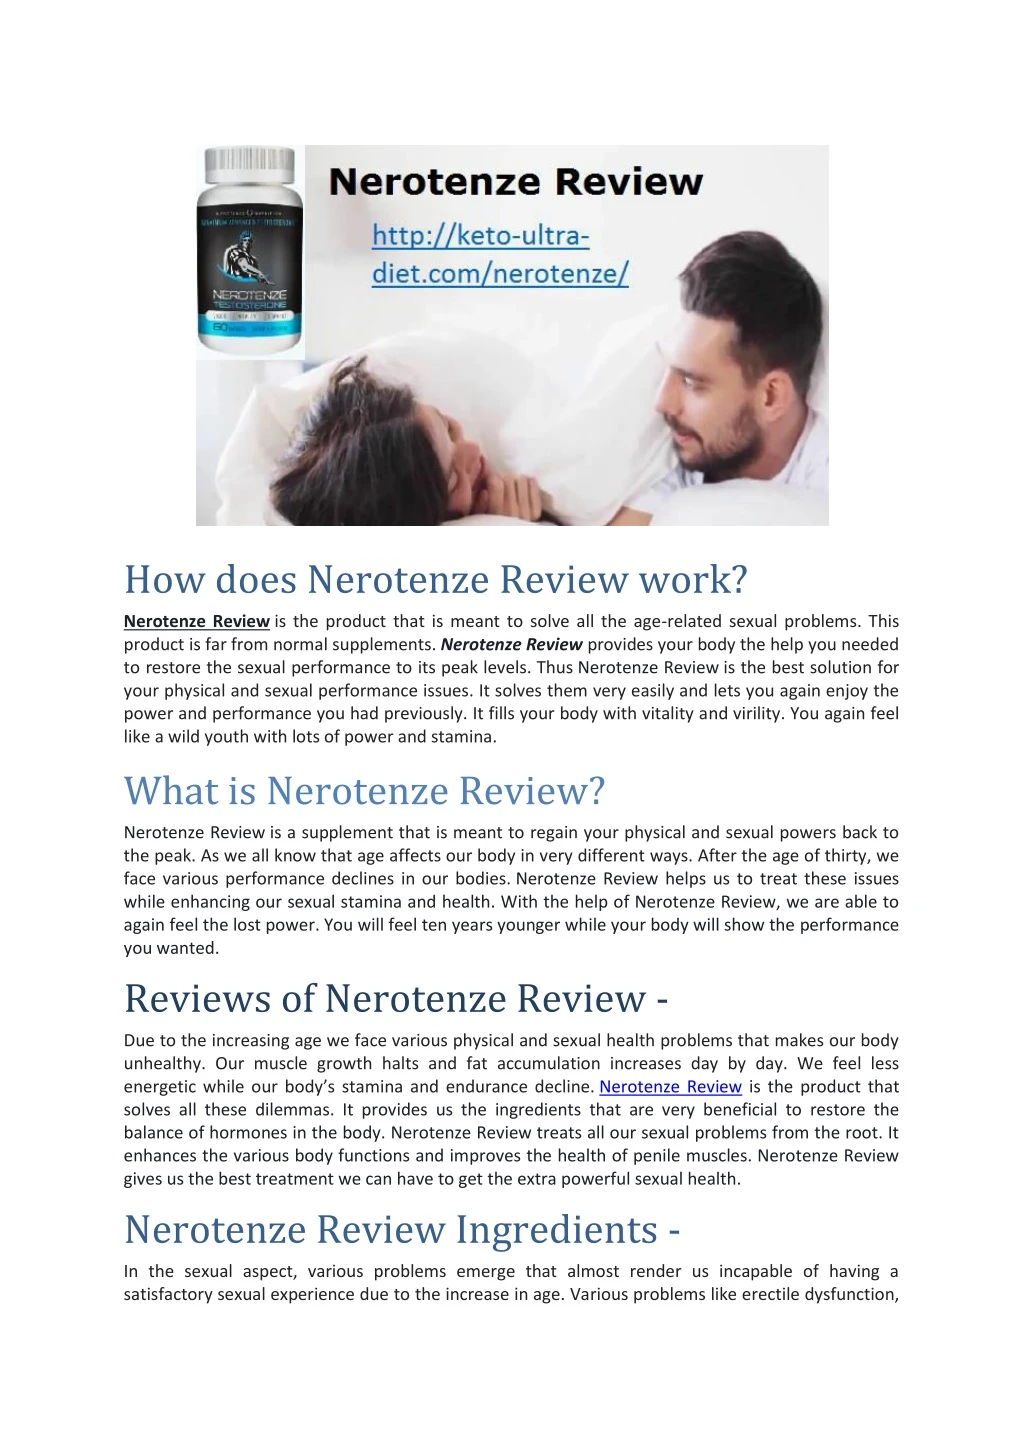 how does nerotenze review work